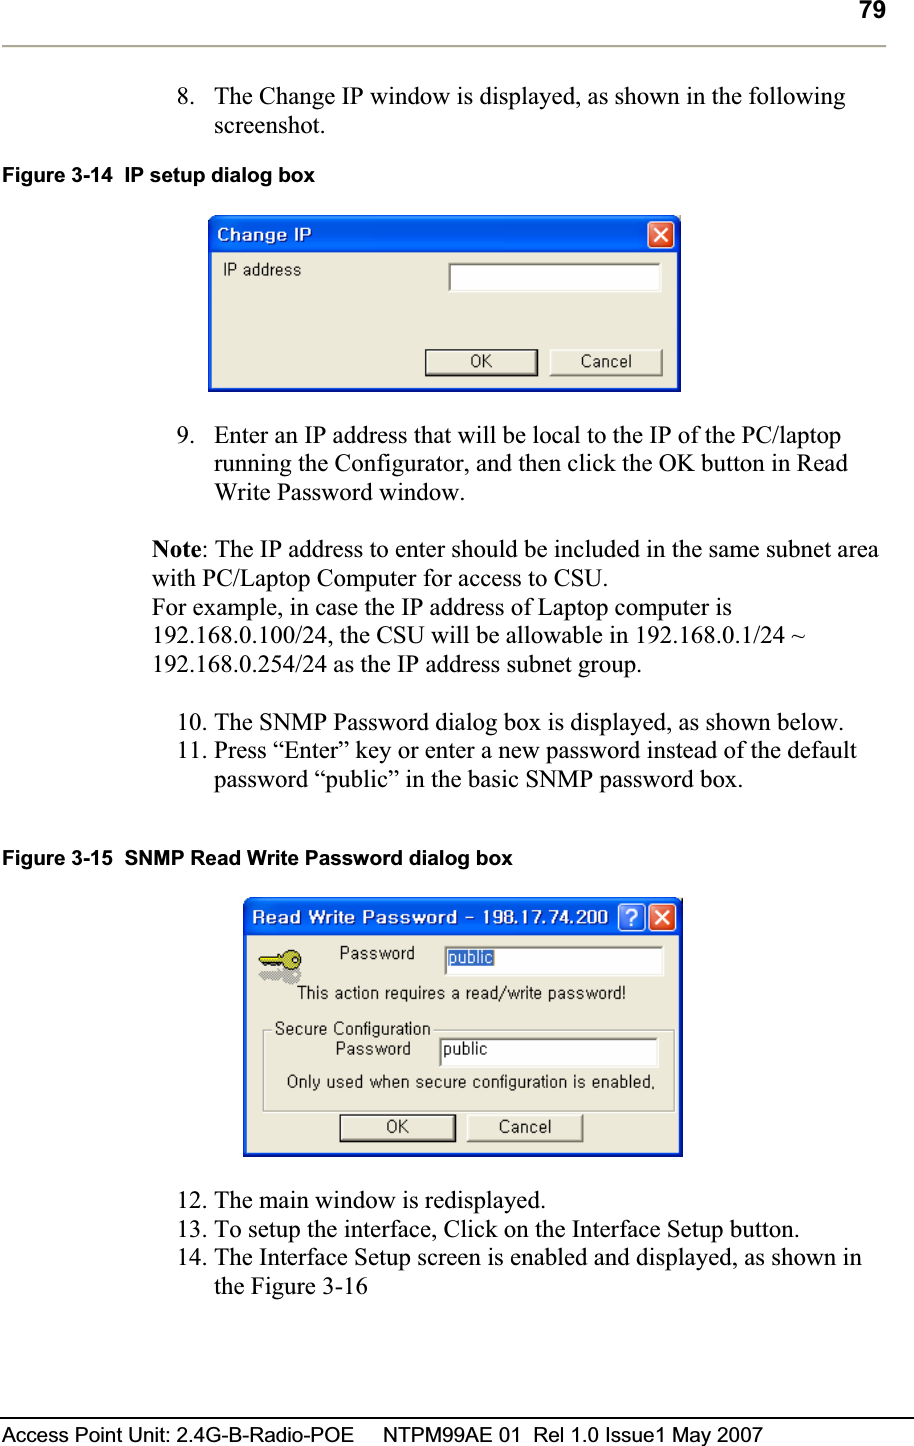 79Access Point Unit: 2.4G-B-Radio-POE     NTPM99AE 01  Rel 1.0 Issue1 May 2007 8. The Change IP window is displayed, as shown in the following screenshot. Figure 3-14  IP setup dialog box 9. Enter an IP address that will be local to the IP of the PC/laptop running the Configurator, and then click the OK button in Read Write Password window.   Note: The IP address to enter should be included in the same subnet area with PC/Laptop Computer for access to CSU.  For example, in case the IP address of Laptop computer is 192.168.0.100/24, the CSU will be allowable in 192.168.0.1/24 ~ 192.168.0.254/24 as the IP address subnet group. 10. The SNMP Password dialog box is displayed, as shown below. 11. Press “Enter” key or enter a new password instead of the default password “public” in the basic SNMP password box.Figure 3-15  SNMP Read Write Password dialog box 12. The main window is redisplayed.  13. To setup the interface, Click on the Interface Setup button.14. The Interface Setup screen is enabled and displayed, as shown in the Figure 3-16 